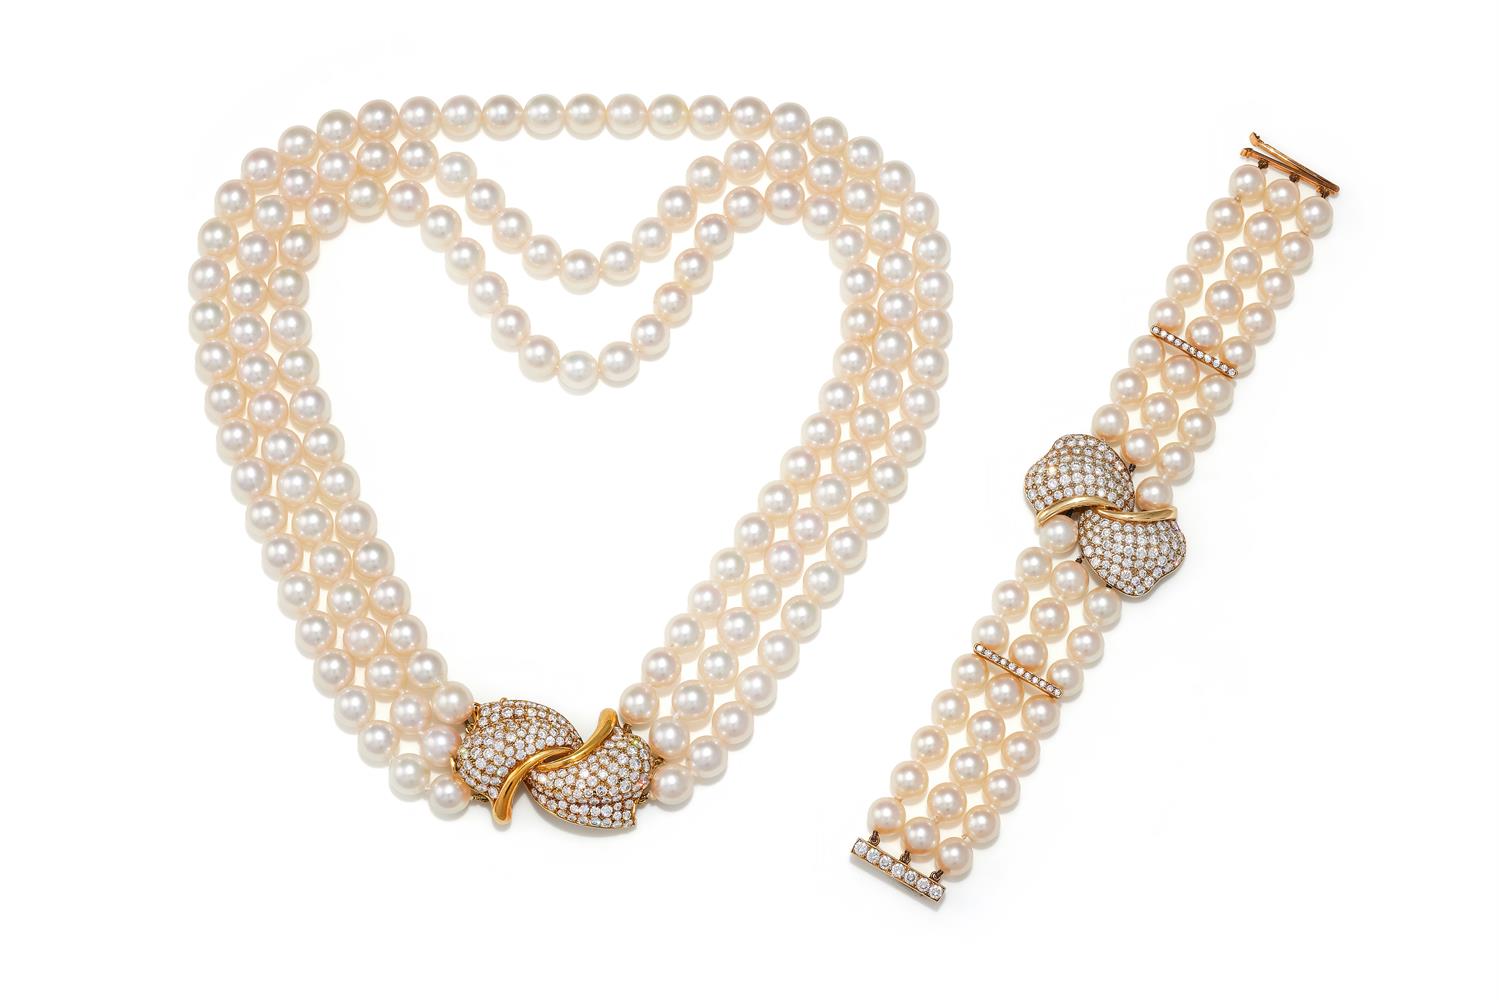 ASPREY, A CULTURED PEARL AND DIAMOND BRACELET AND SIMILAR NECKLACE